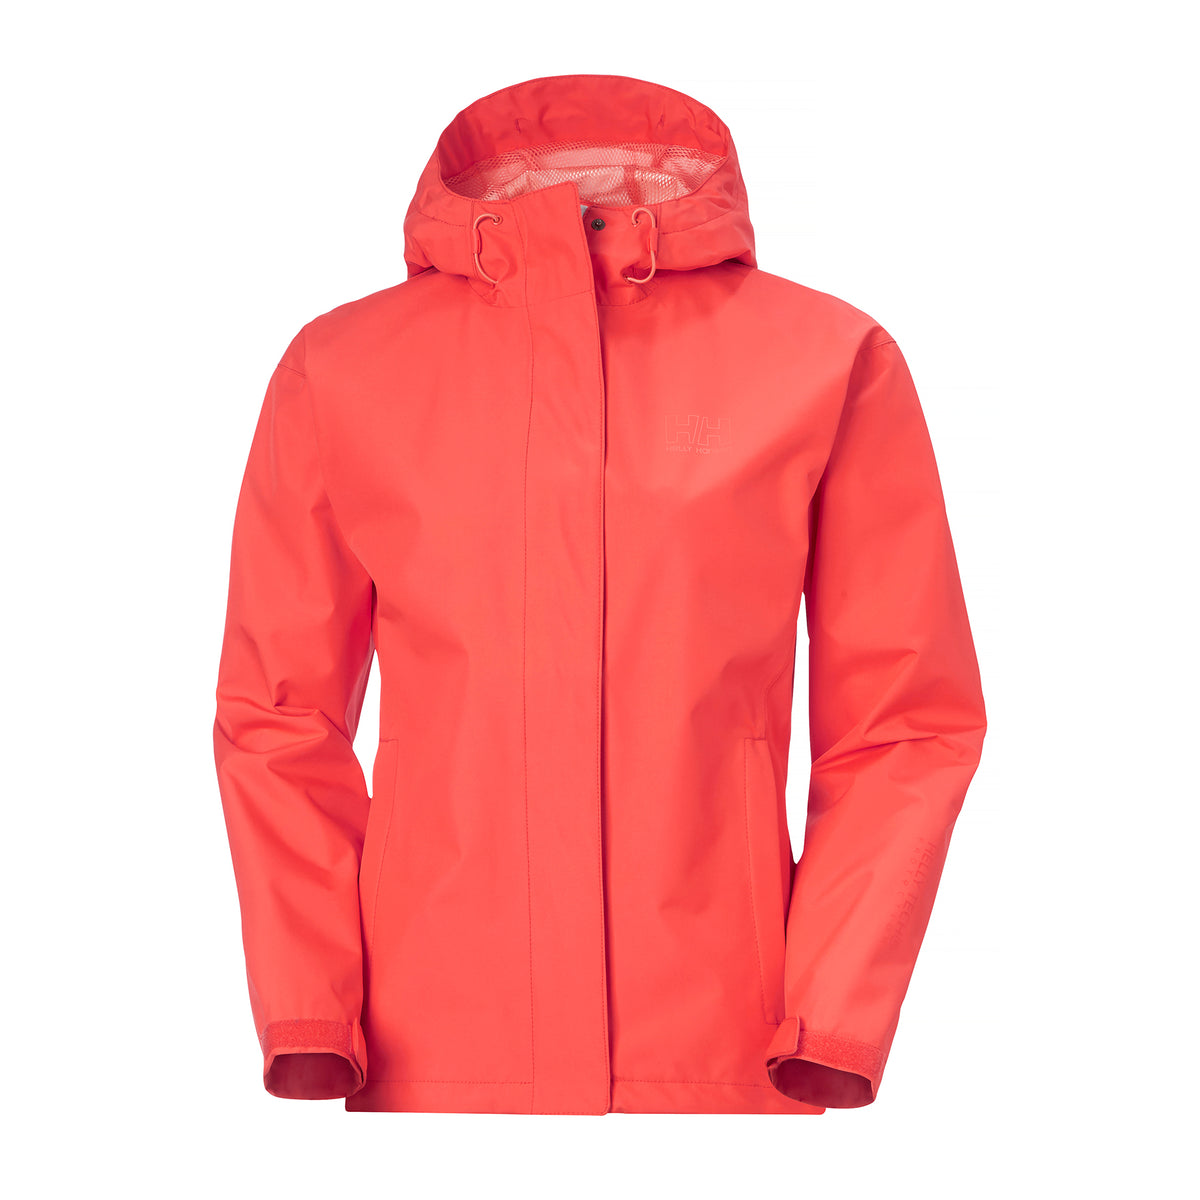 Hero image featuring the front of the Helly Hansen Women's Seven J Rain Jacket in hot coral 